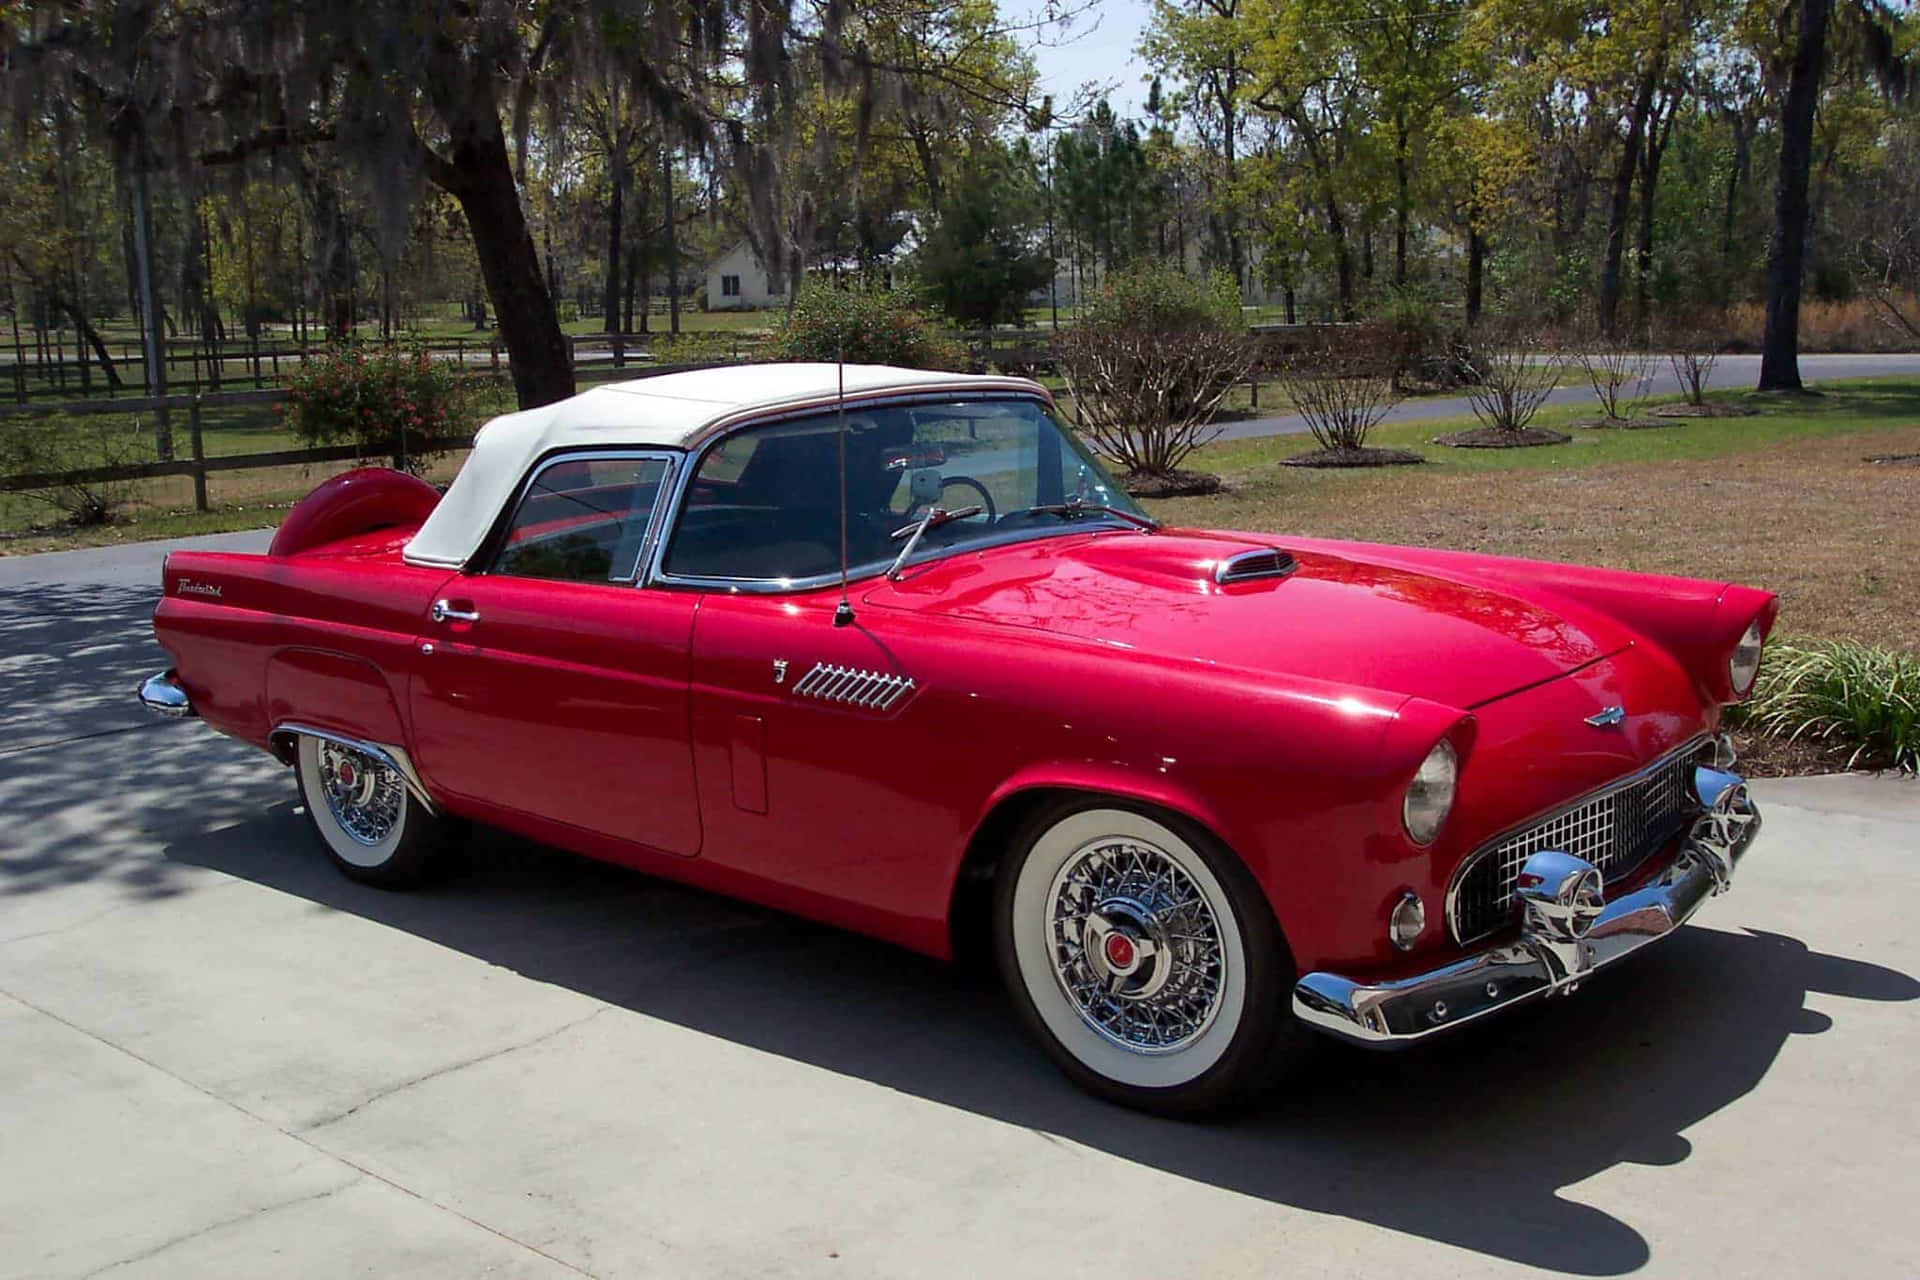 Classic Ford Thunderbird Cruising the Streets Wallpaper